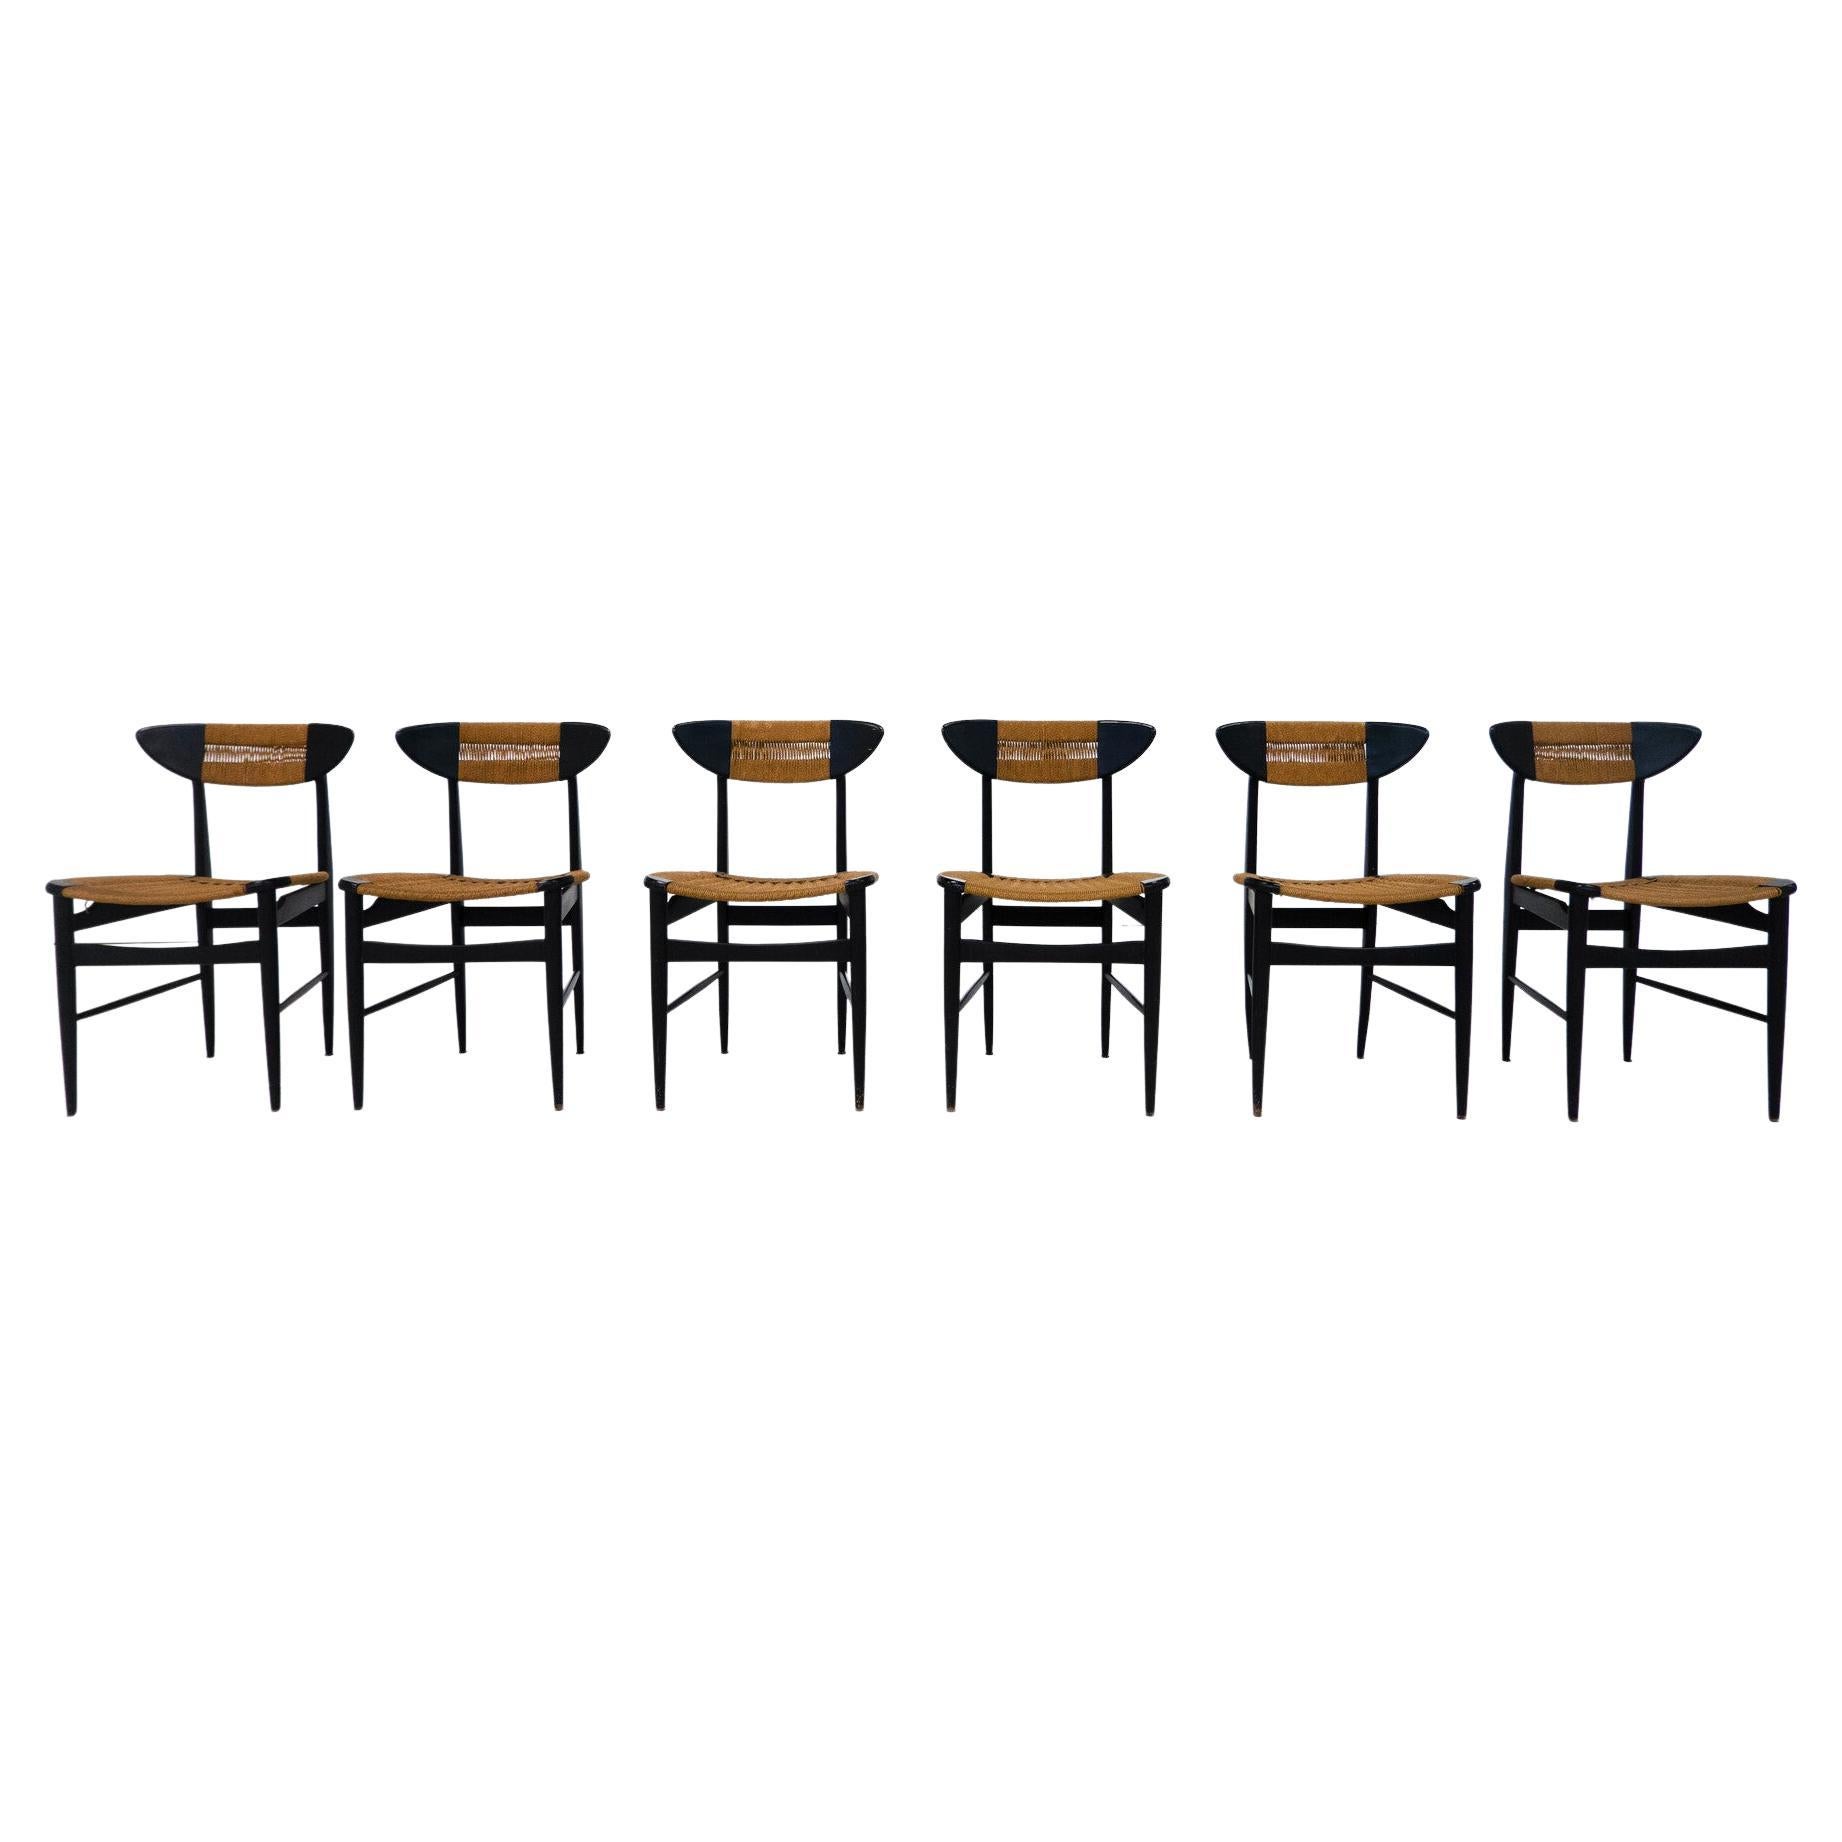 Mid-Century Modern Set of 6 Chairs, Black Wood and Rope, Italy, 1960s